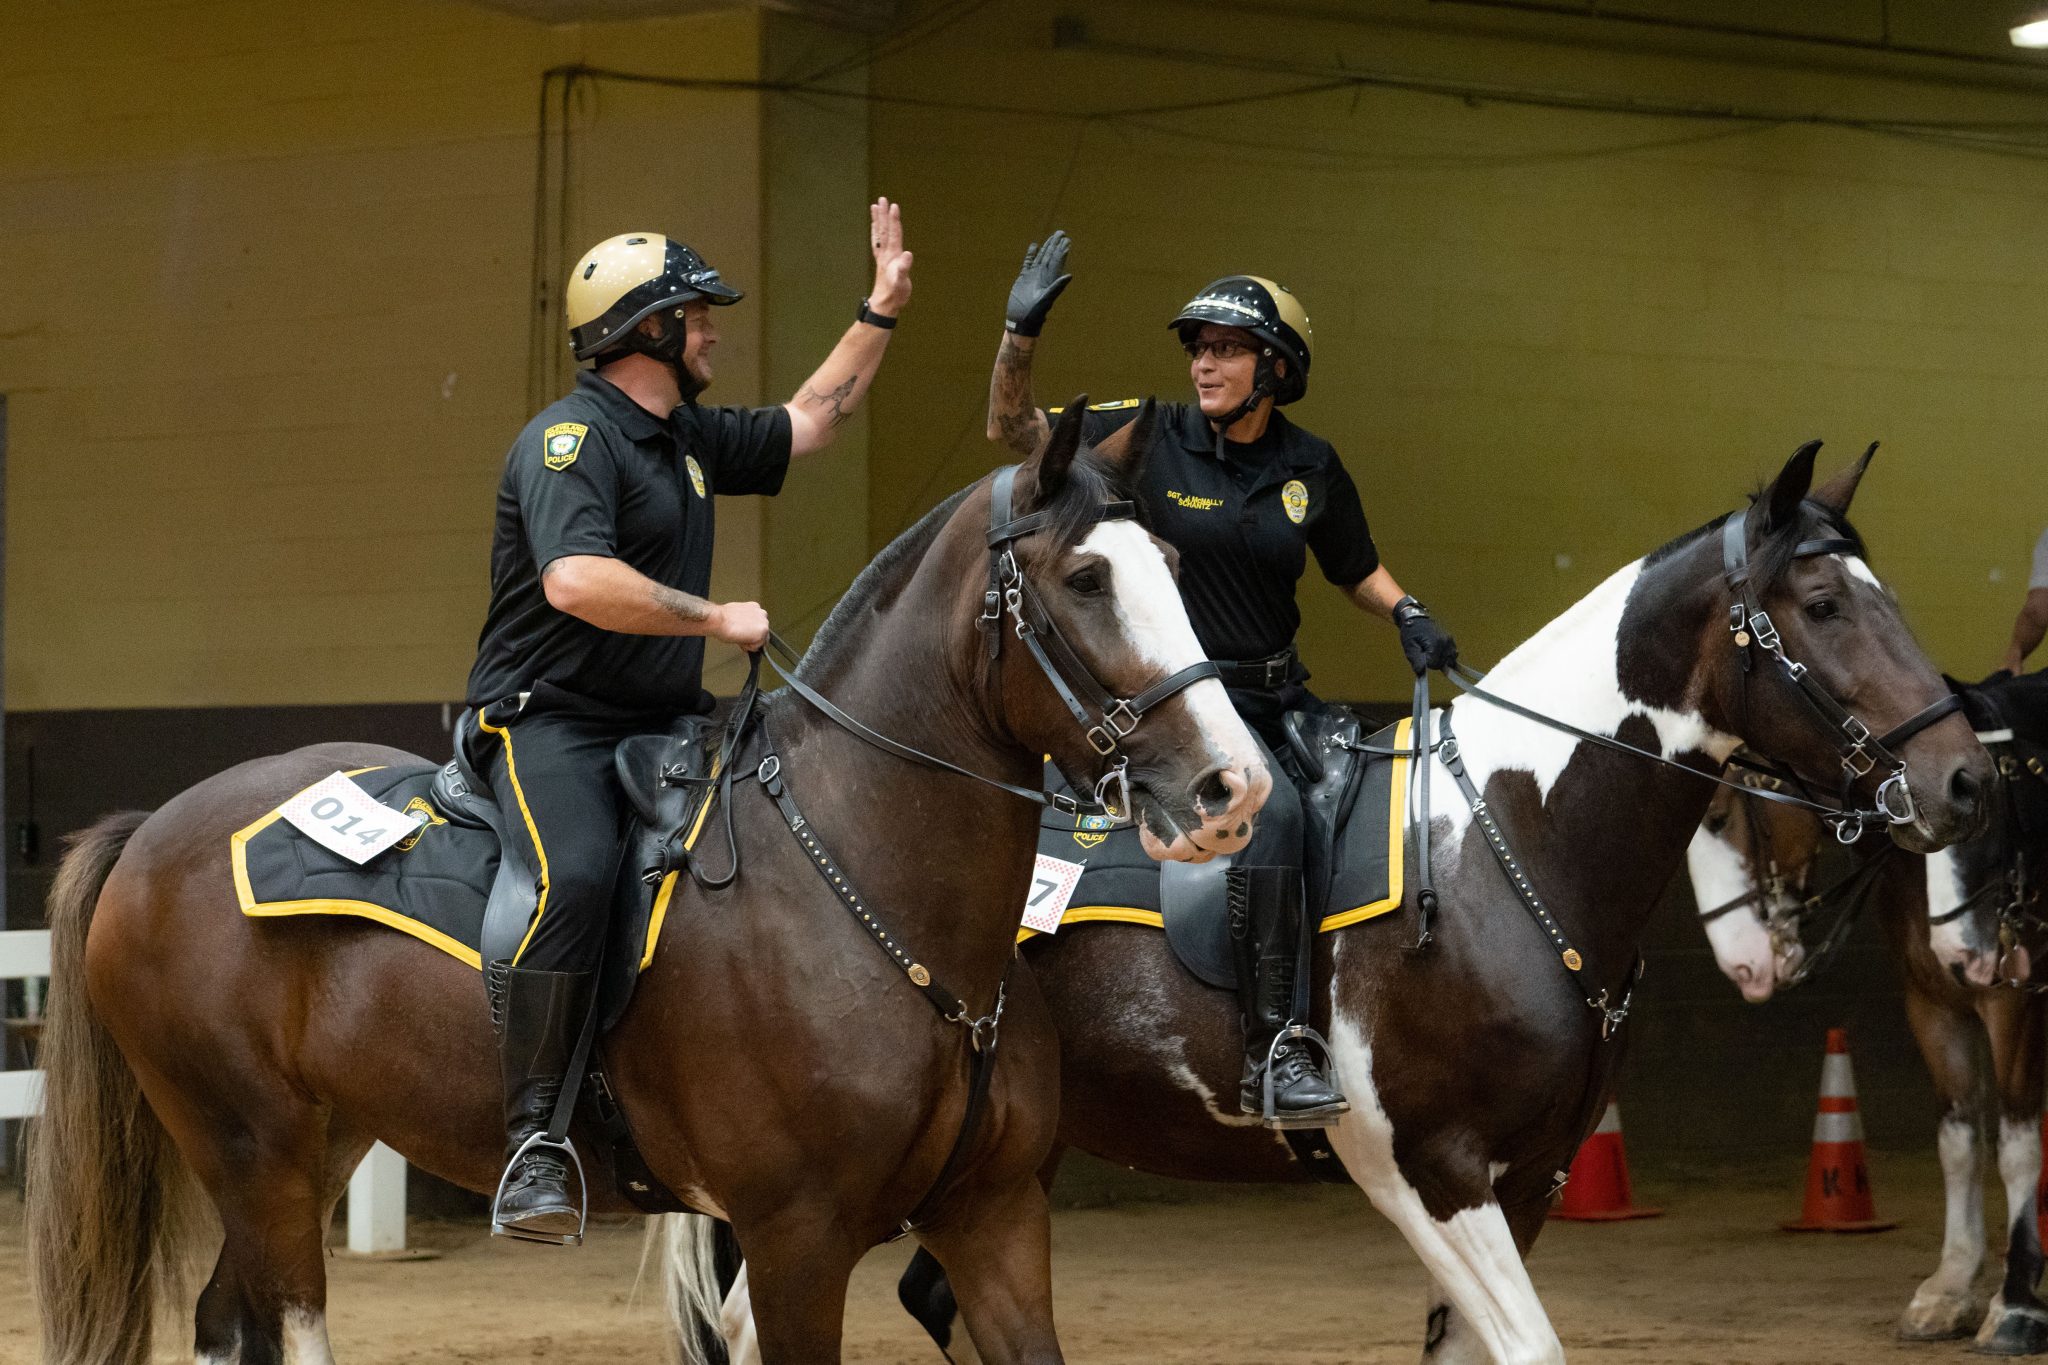 High Fives at the Mounted Police Colloquium